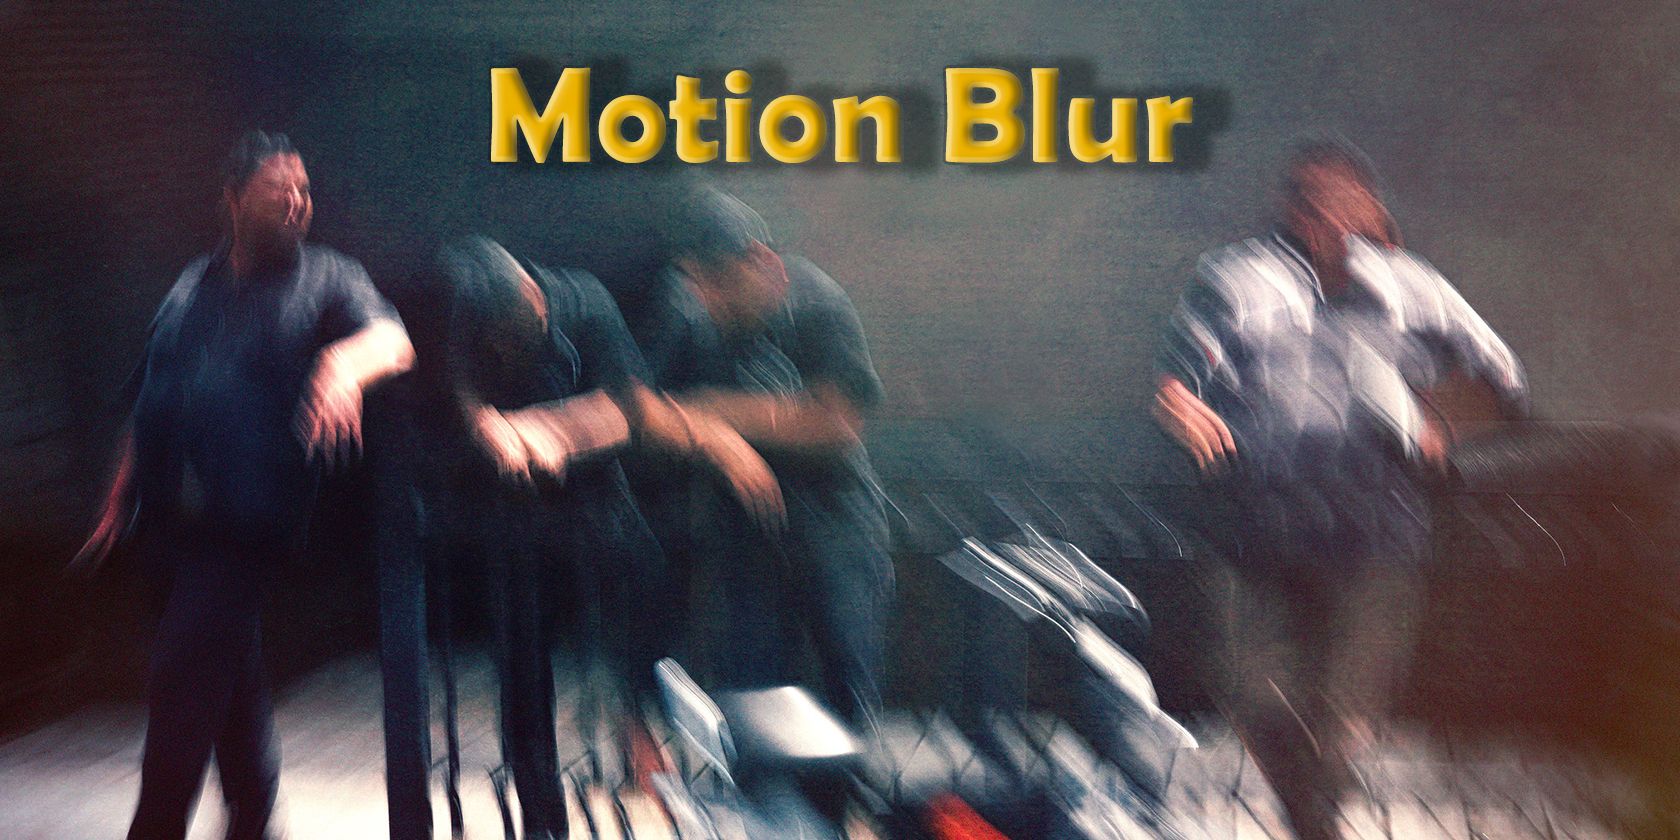 How to Capture Motion Blur in Photography